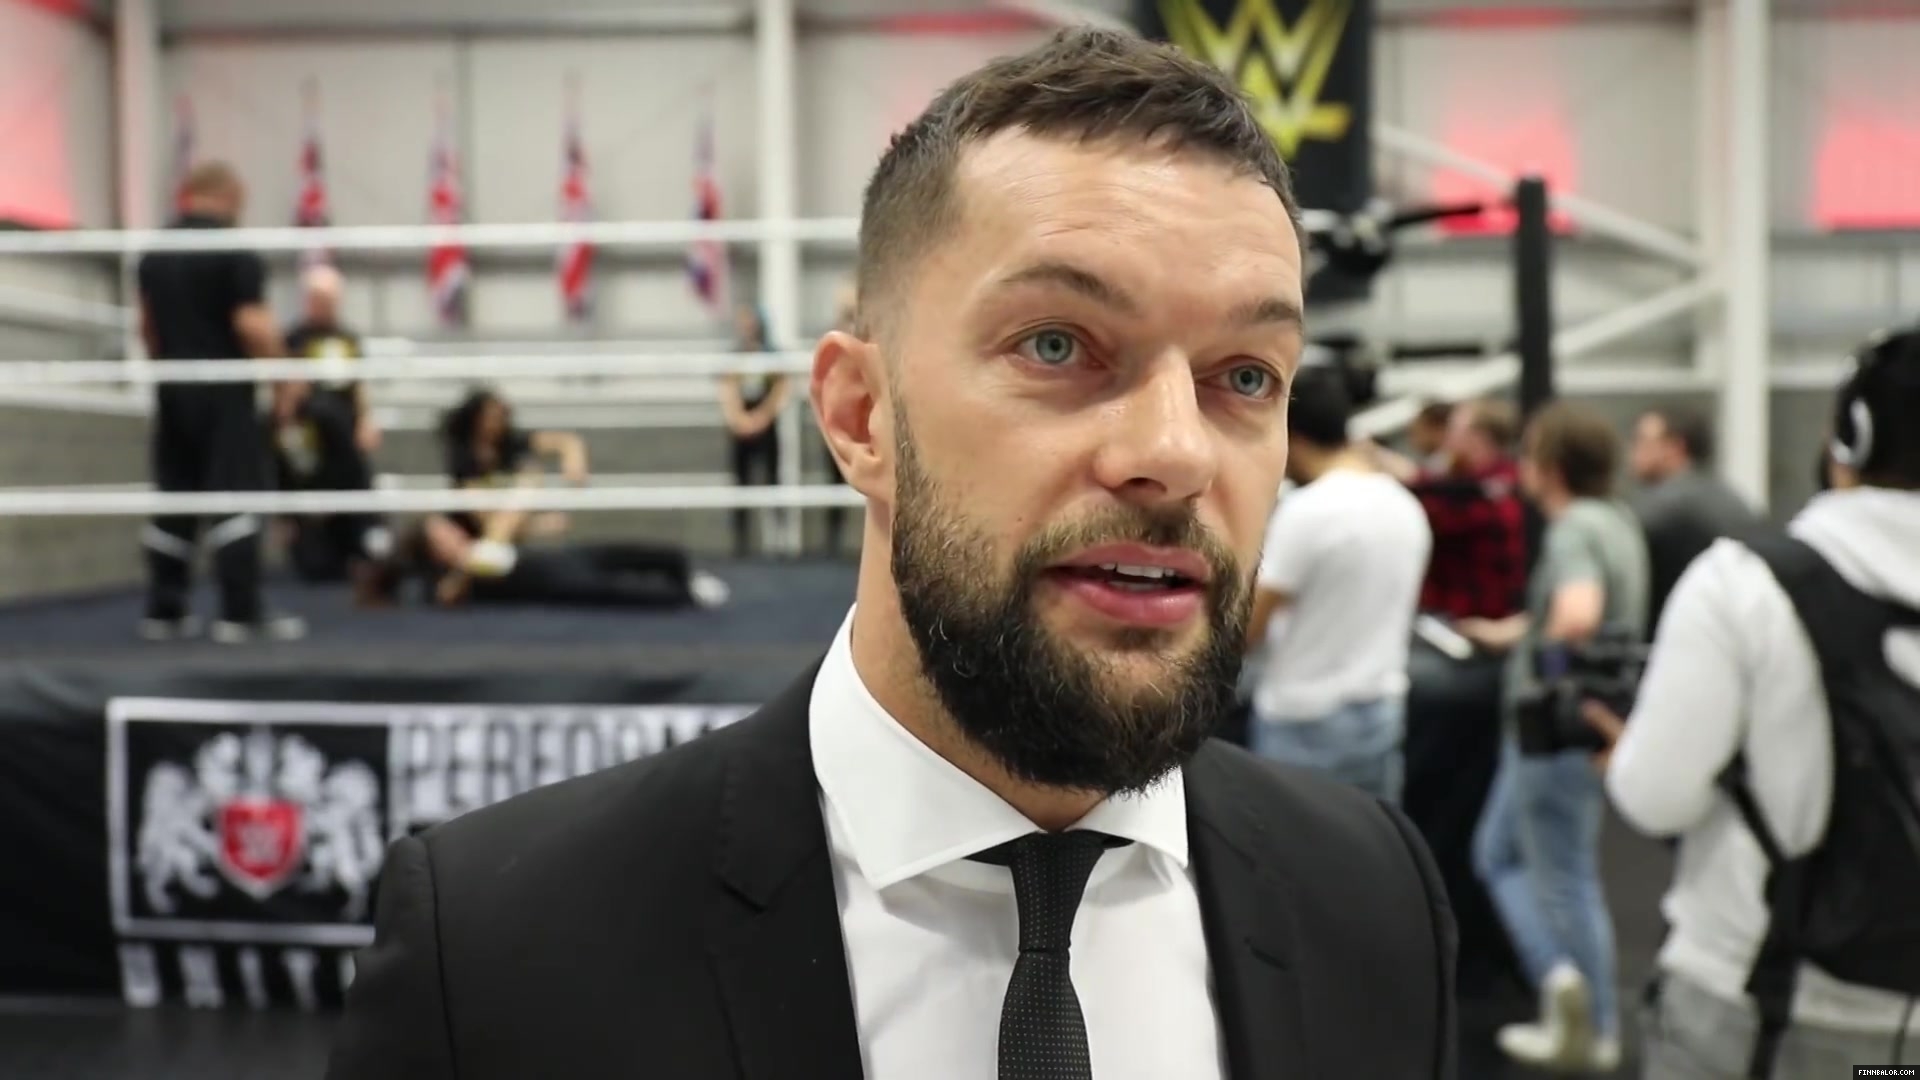 WWE_Superstar_FINN_BALOR_joins_MOUSTACHE_MOUNTAIN_at_the_opening_of_the_NXT_UK_PC_151.jpg